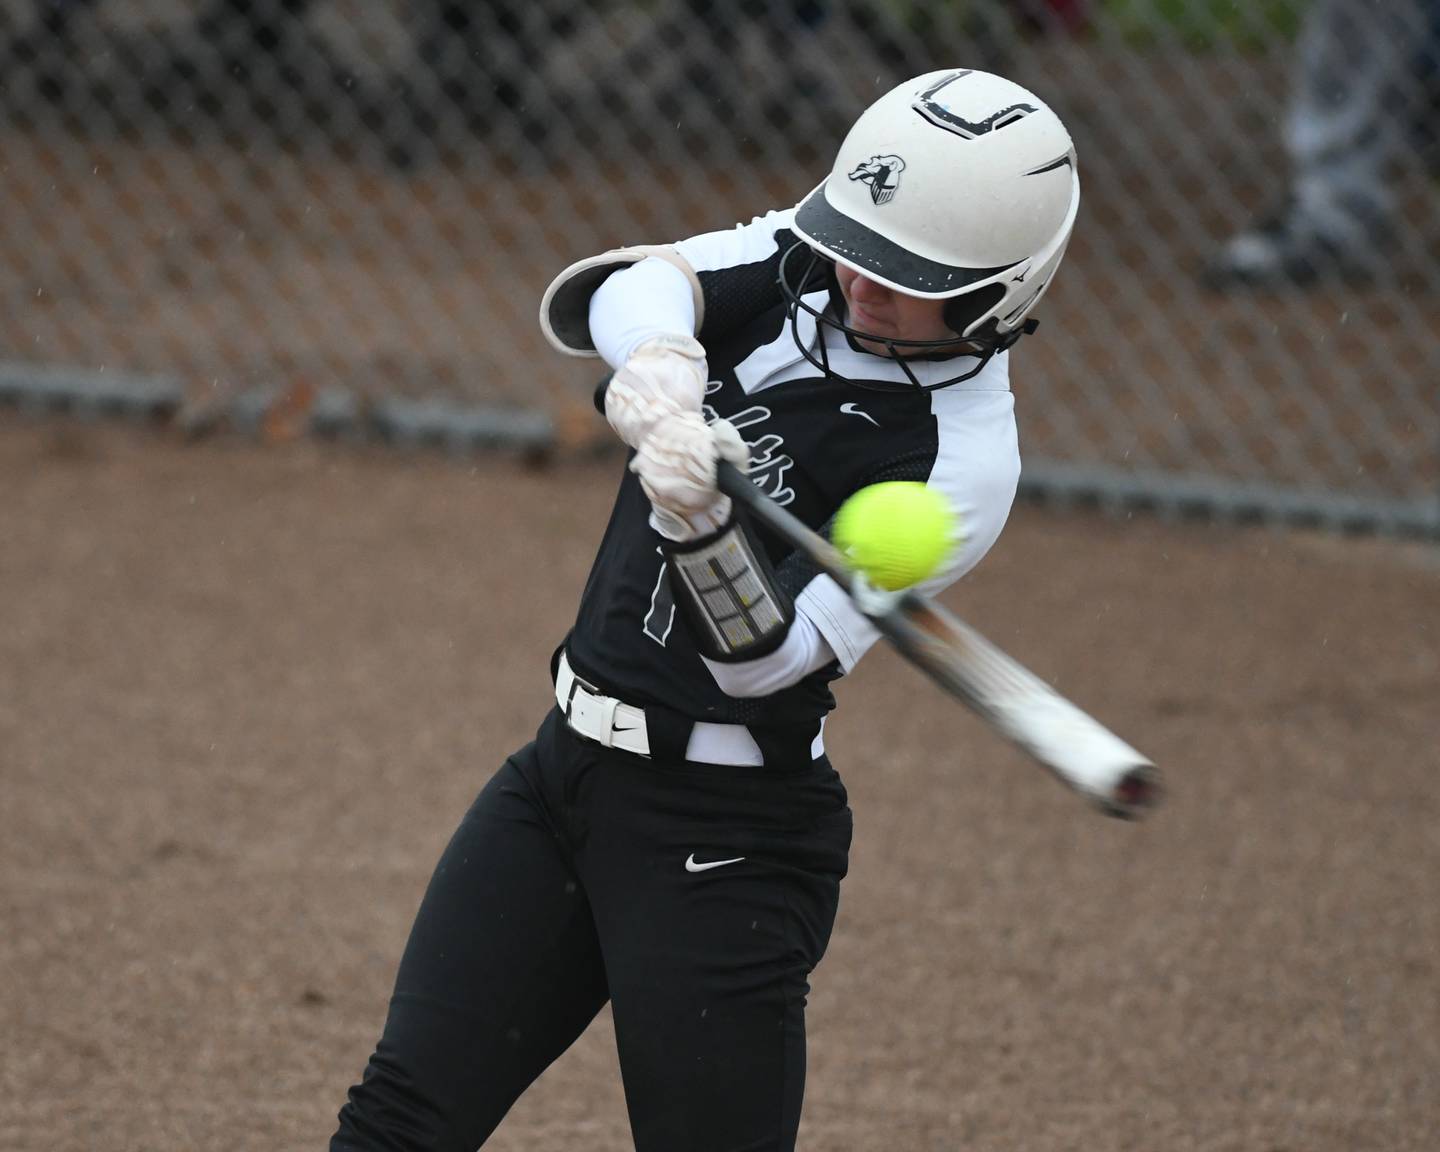 Kaneland Kailey Plank (1) makes contact with the ball on Saturday April 29th while traveling to take on DeKalb at DeKalb High School.